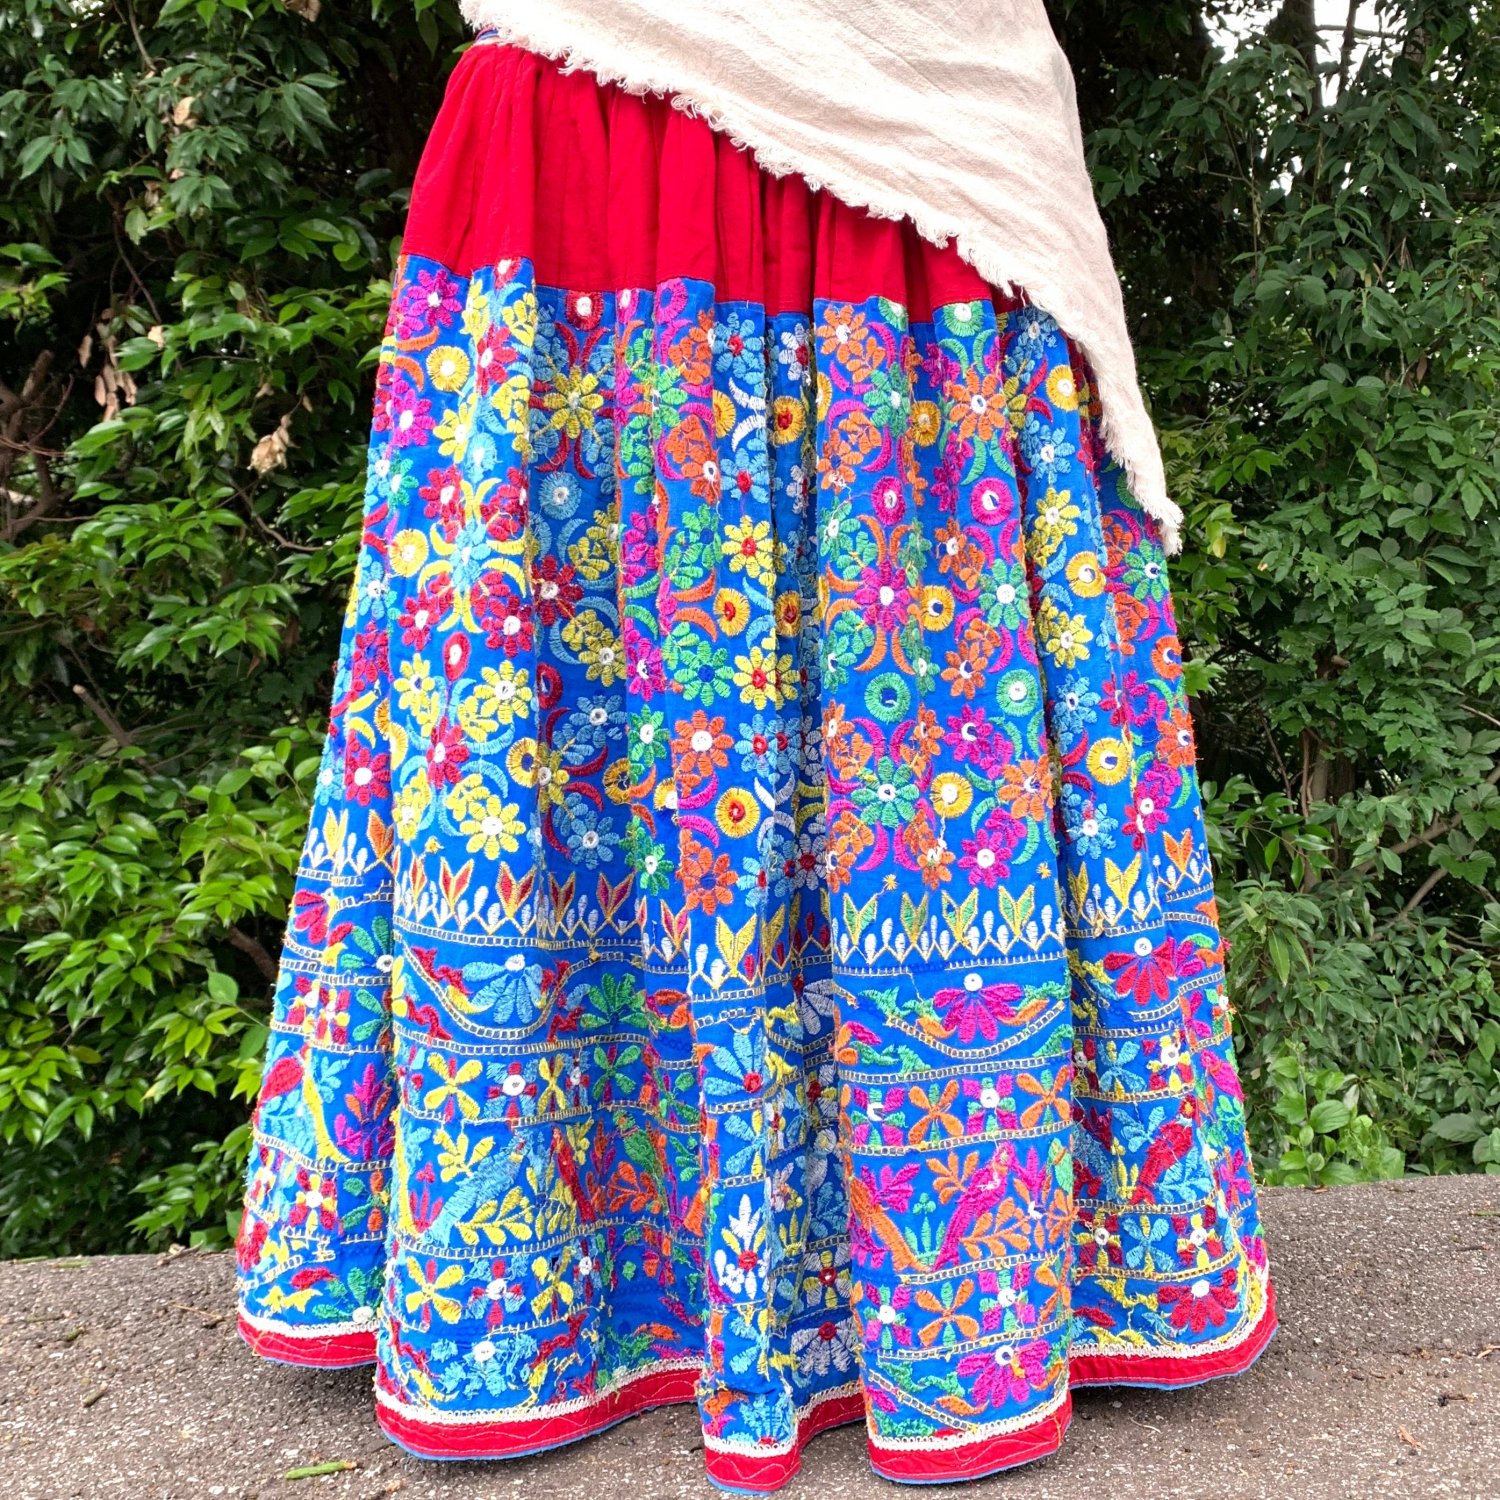 <img class='new_mark_img1' src='https://img.shop-pro.jp/img/new/icons16.gif' style='border:none;display:inline;margin:0px;padding:0px;width:auto;' />＜OUTLET＞Kuchi Gypsy skirt #30 ＊Vintage＊ カッチ刺繍スカート≪レッドx刺繍≫